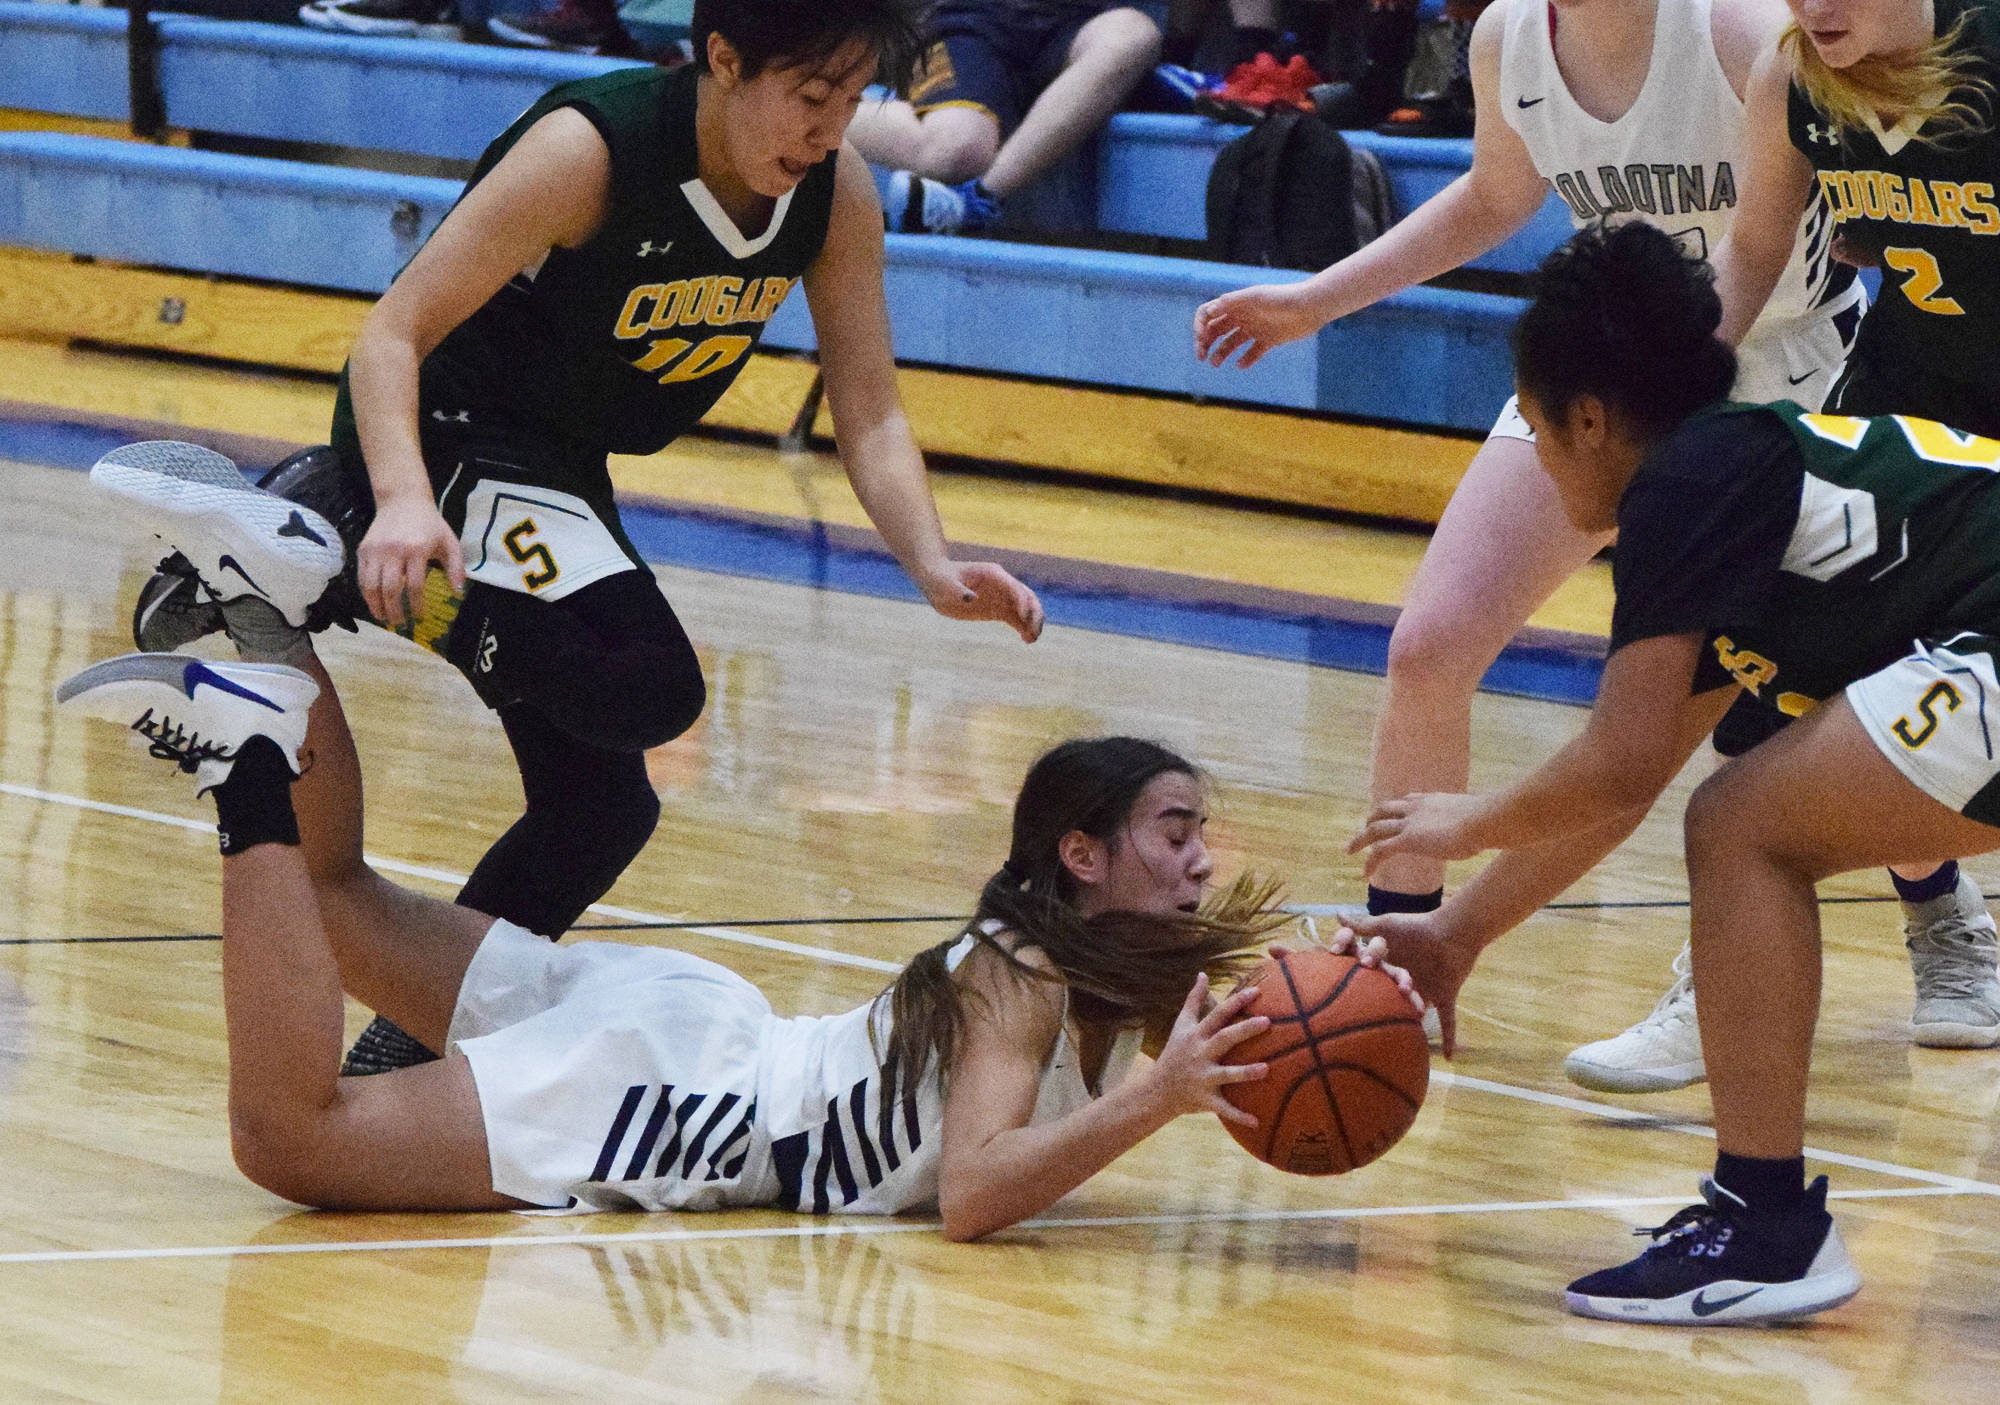 Soldotna’s Drysta Crosby-Schneider retains possesson of the ball after falling Friday, Dec. 20, 2019, against Service at the Powerade/Al Howard Tip-Off tournament at Soldotna High School. (Photo by Joey Klecka/Peninsula Clarion)